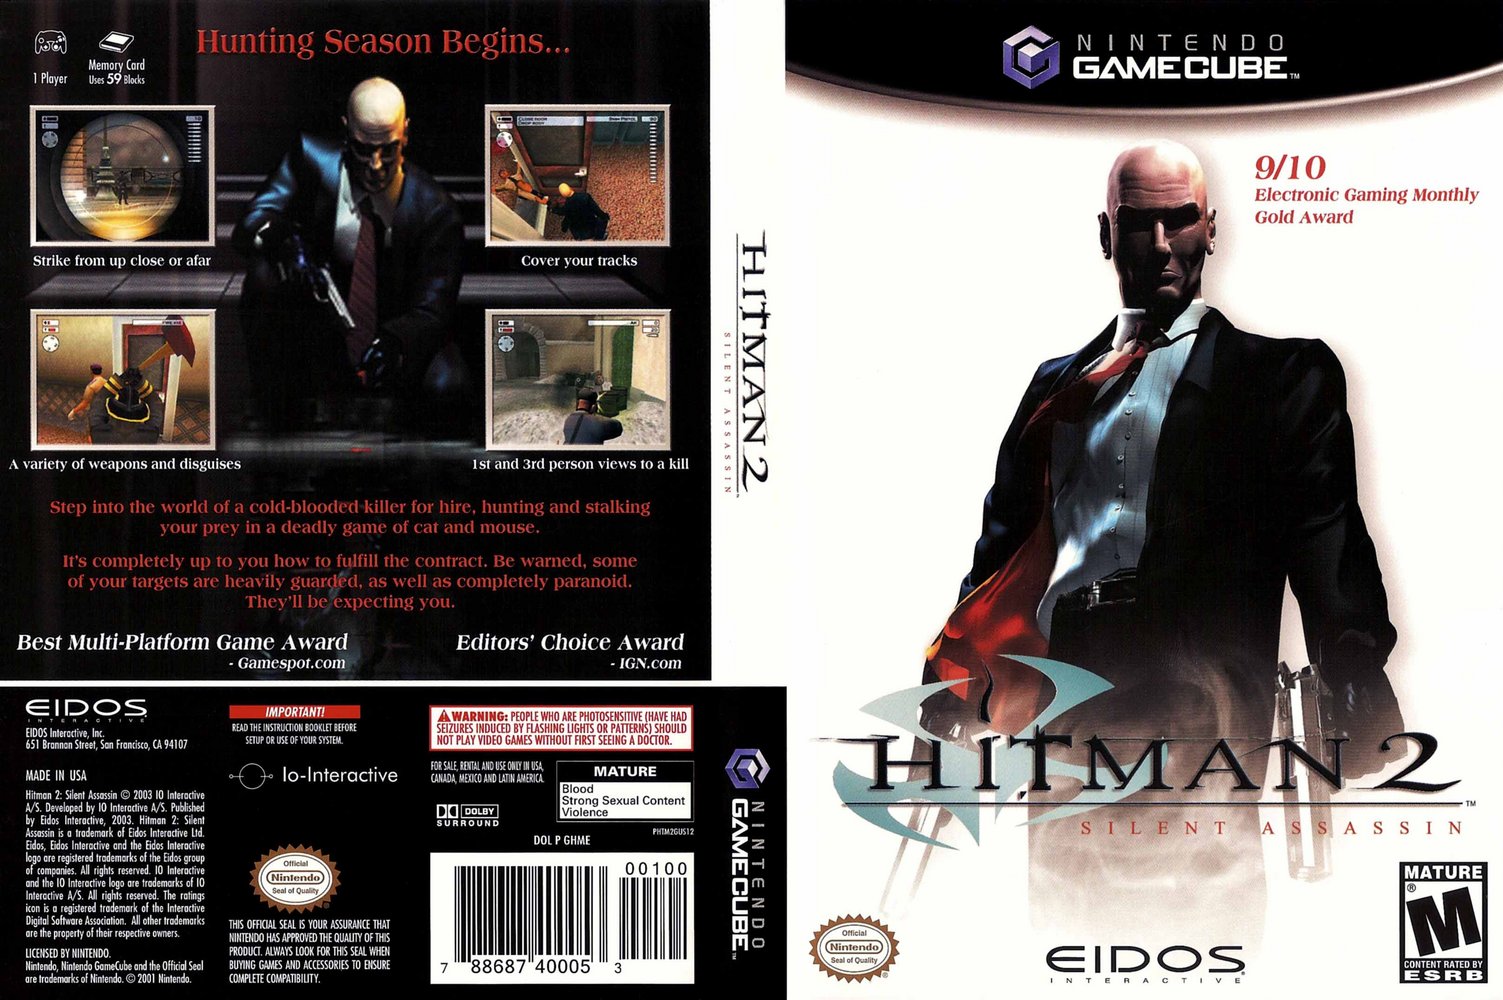 Hitman 2 silent assassin pc iso download free